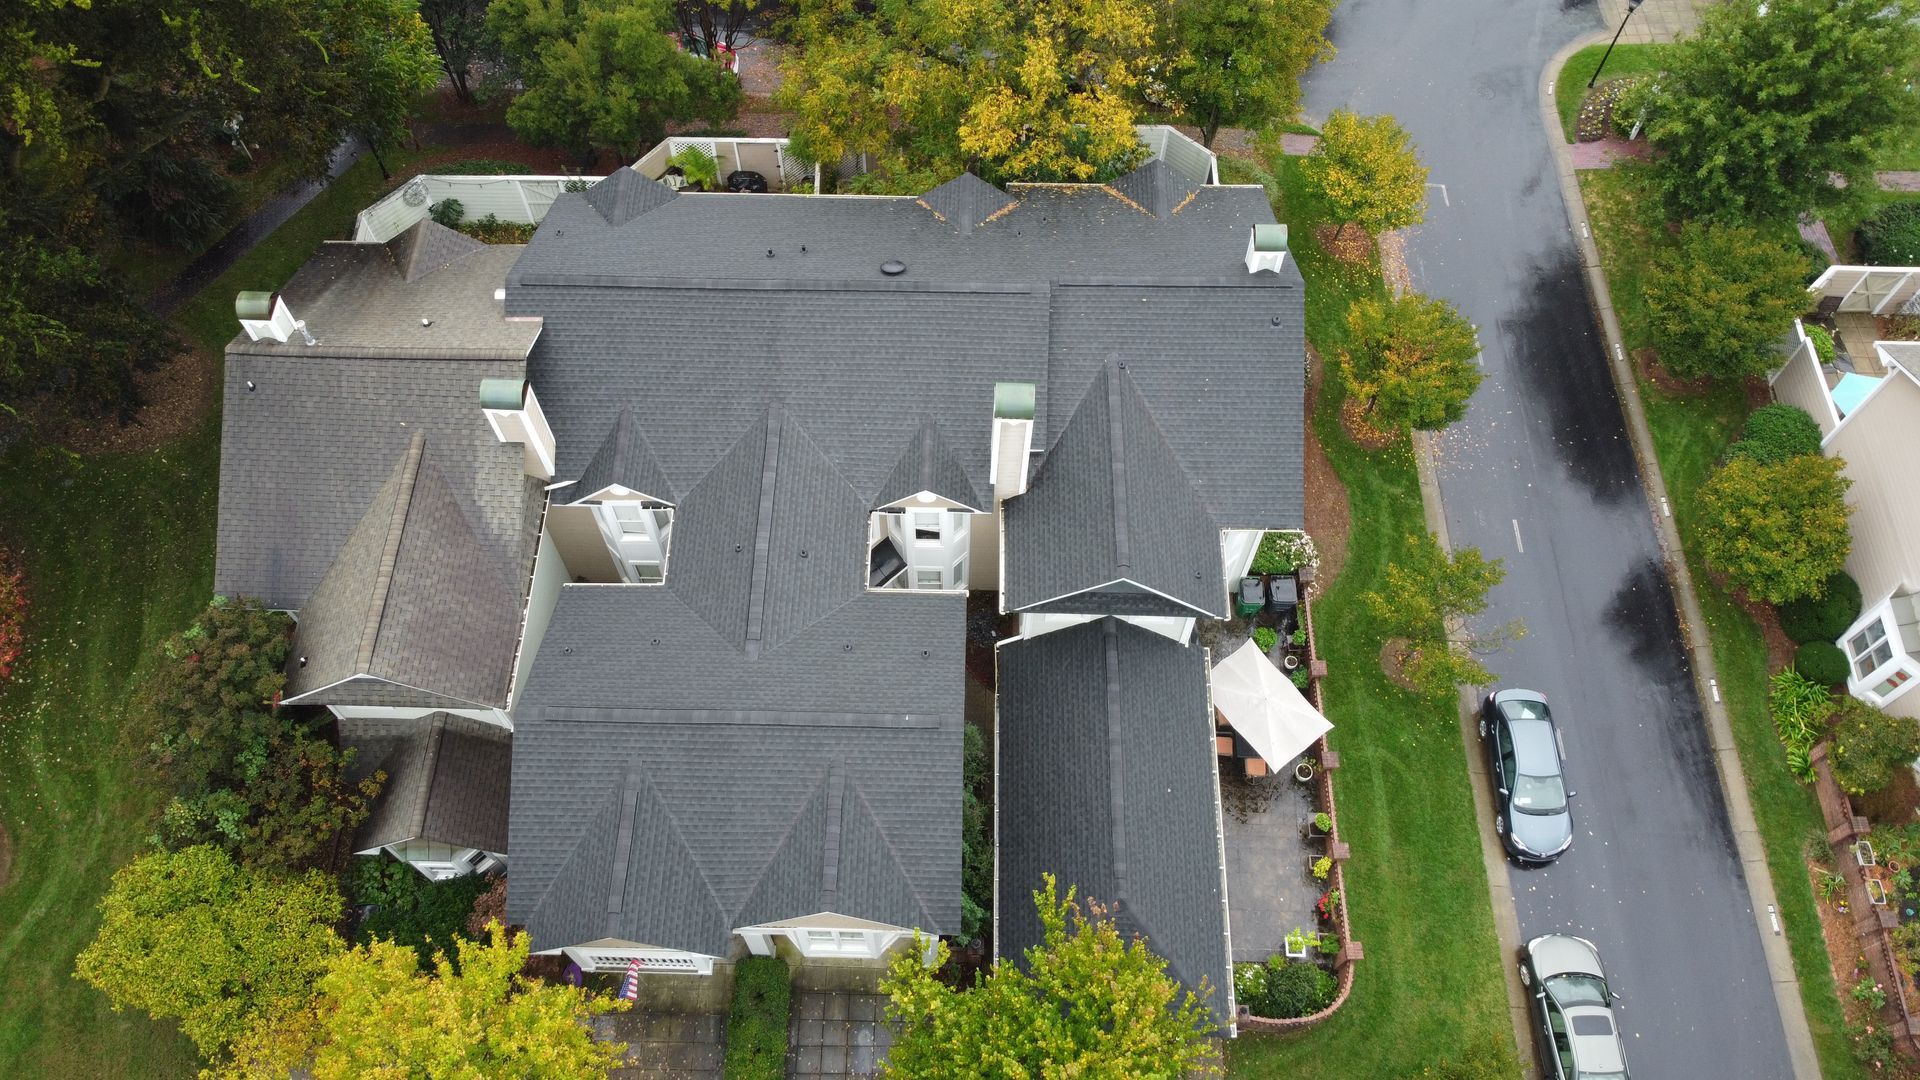 An aerial view of a large house in a residential neighborhood.